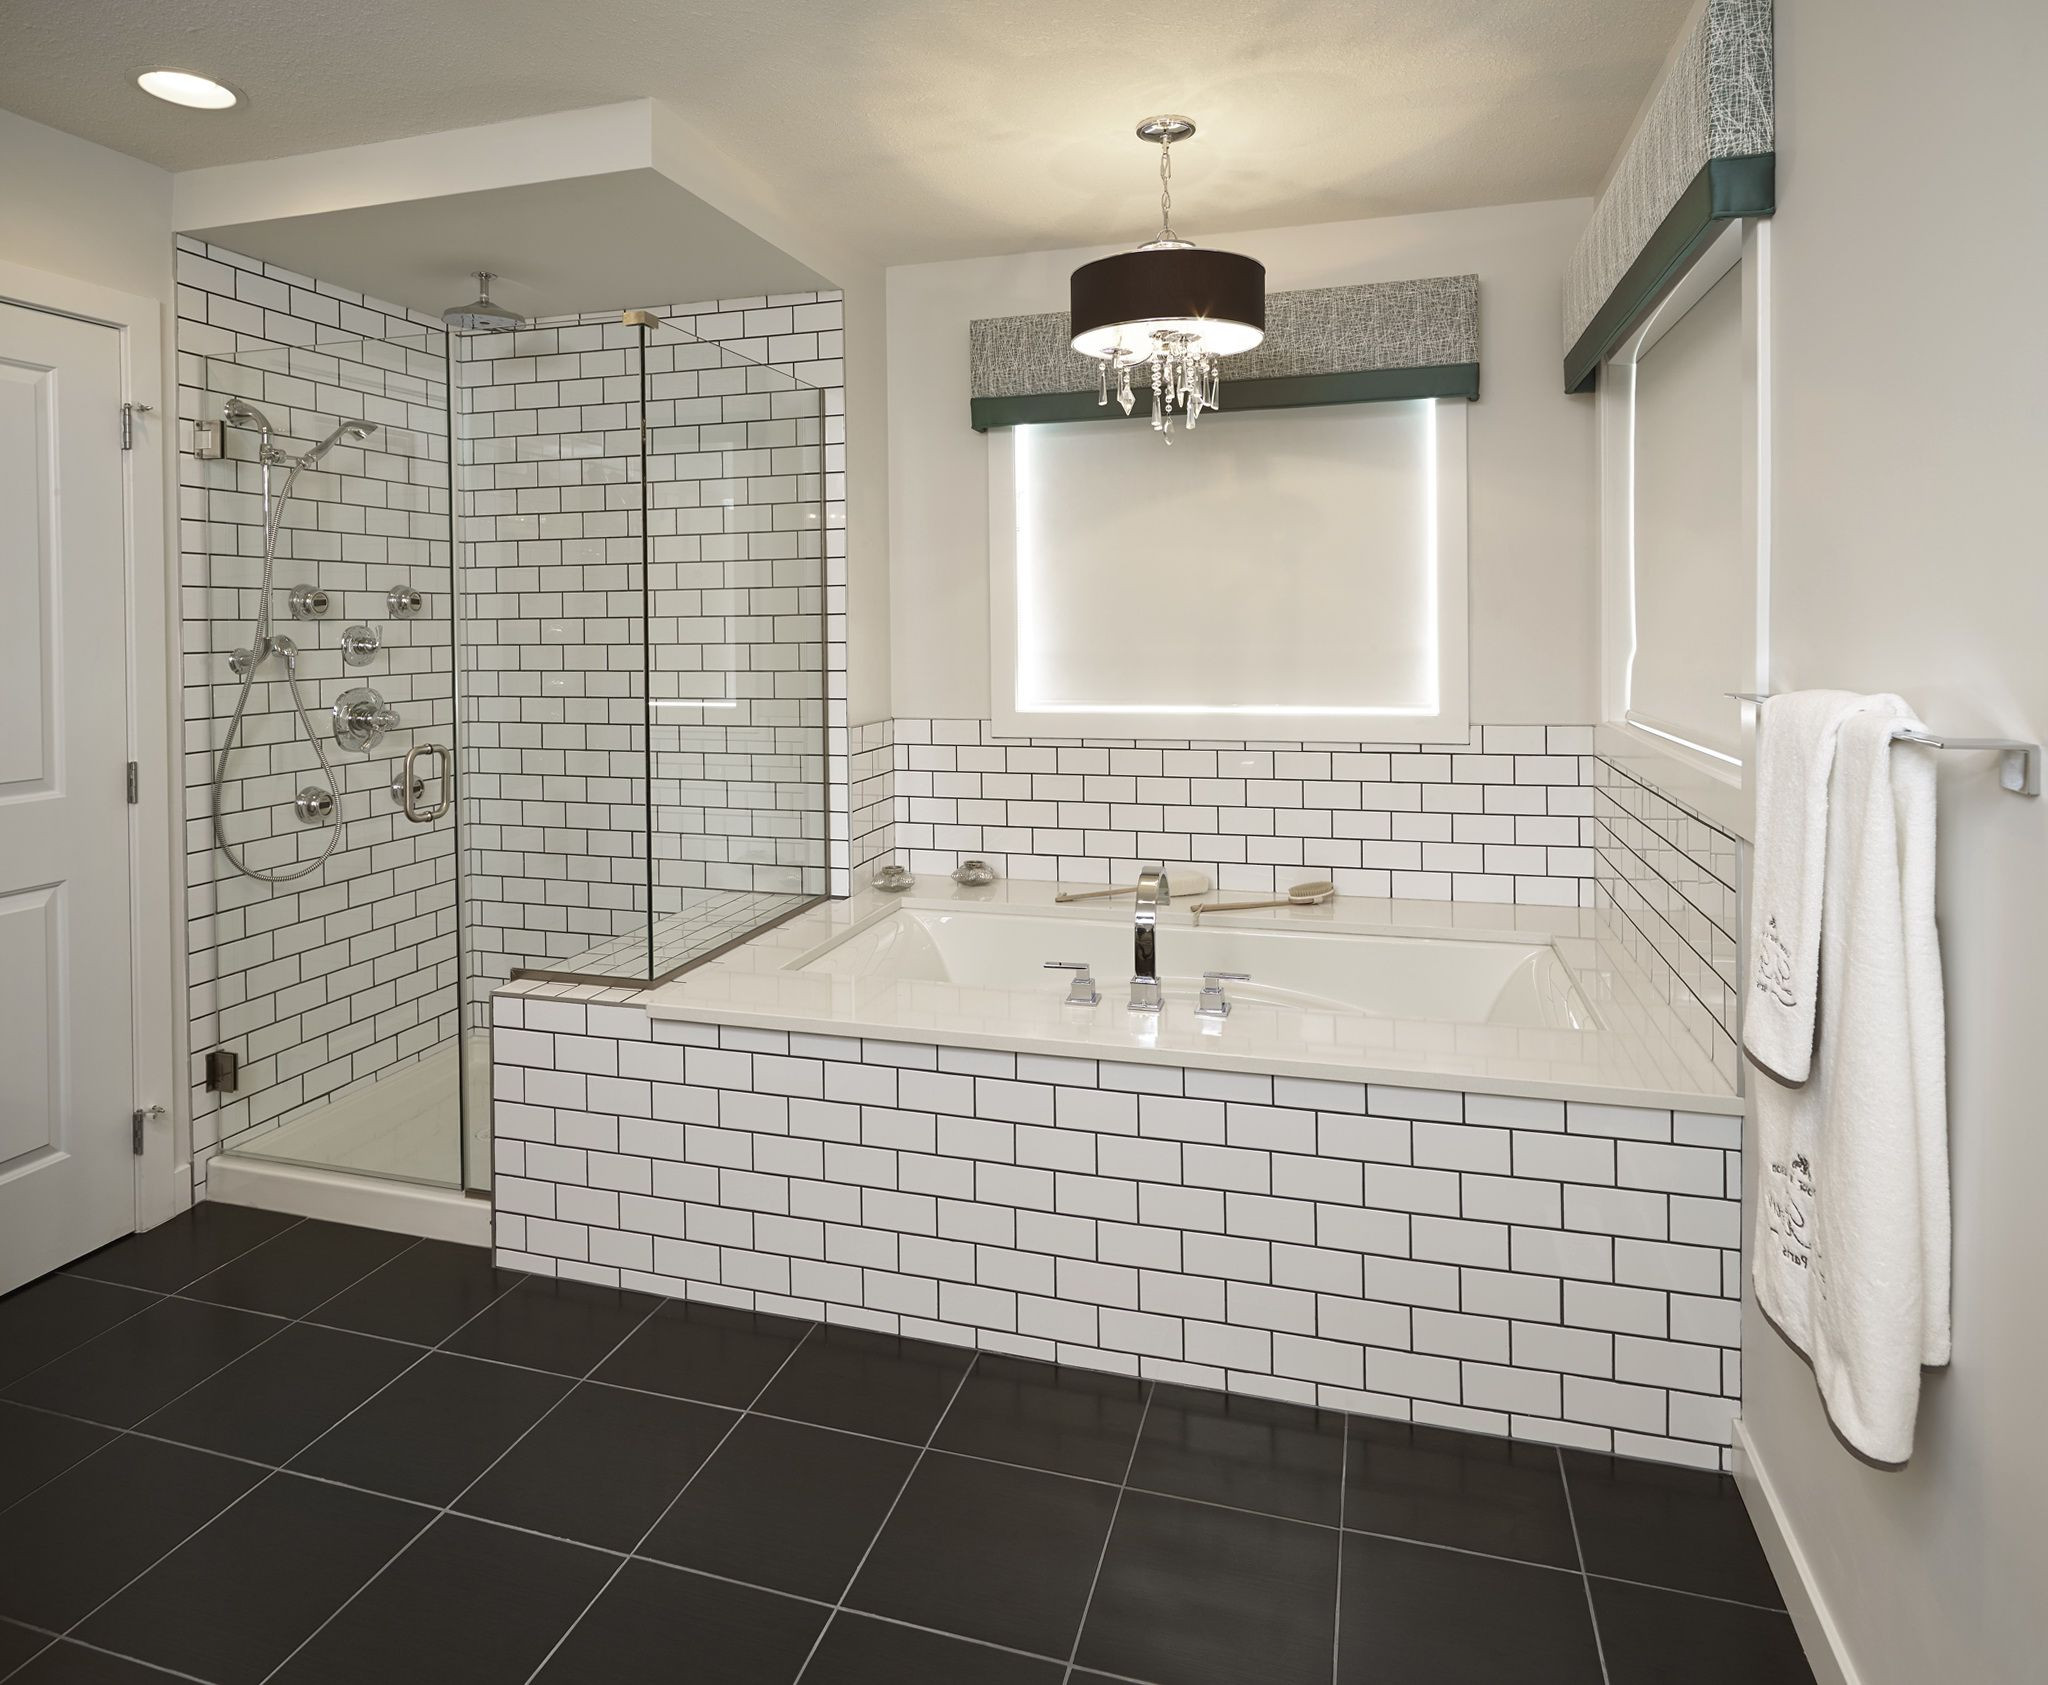 Subway Tile Bathroom Wall
 Top Tips on Choosing the Shower Tiles for Your Bathroom